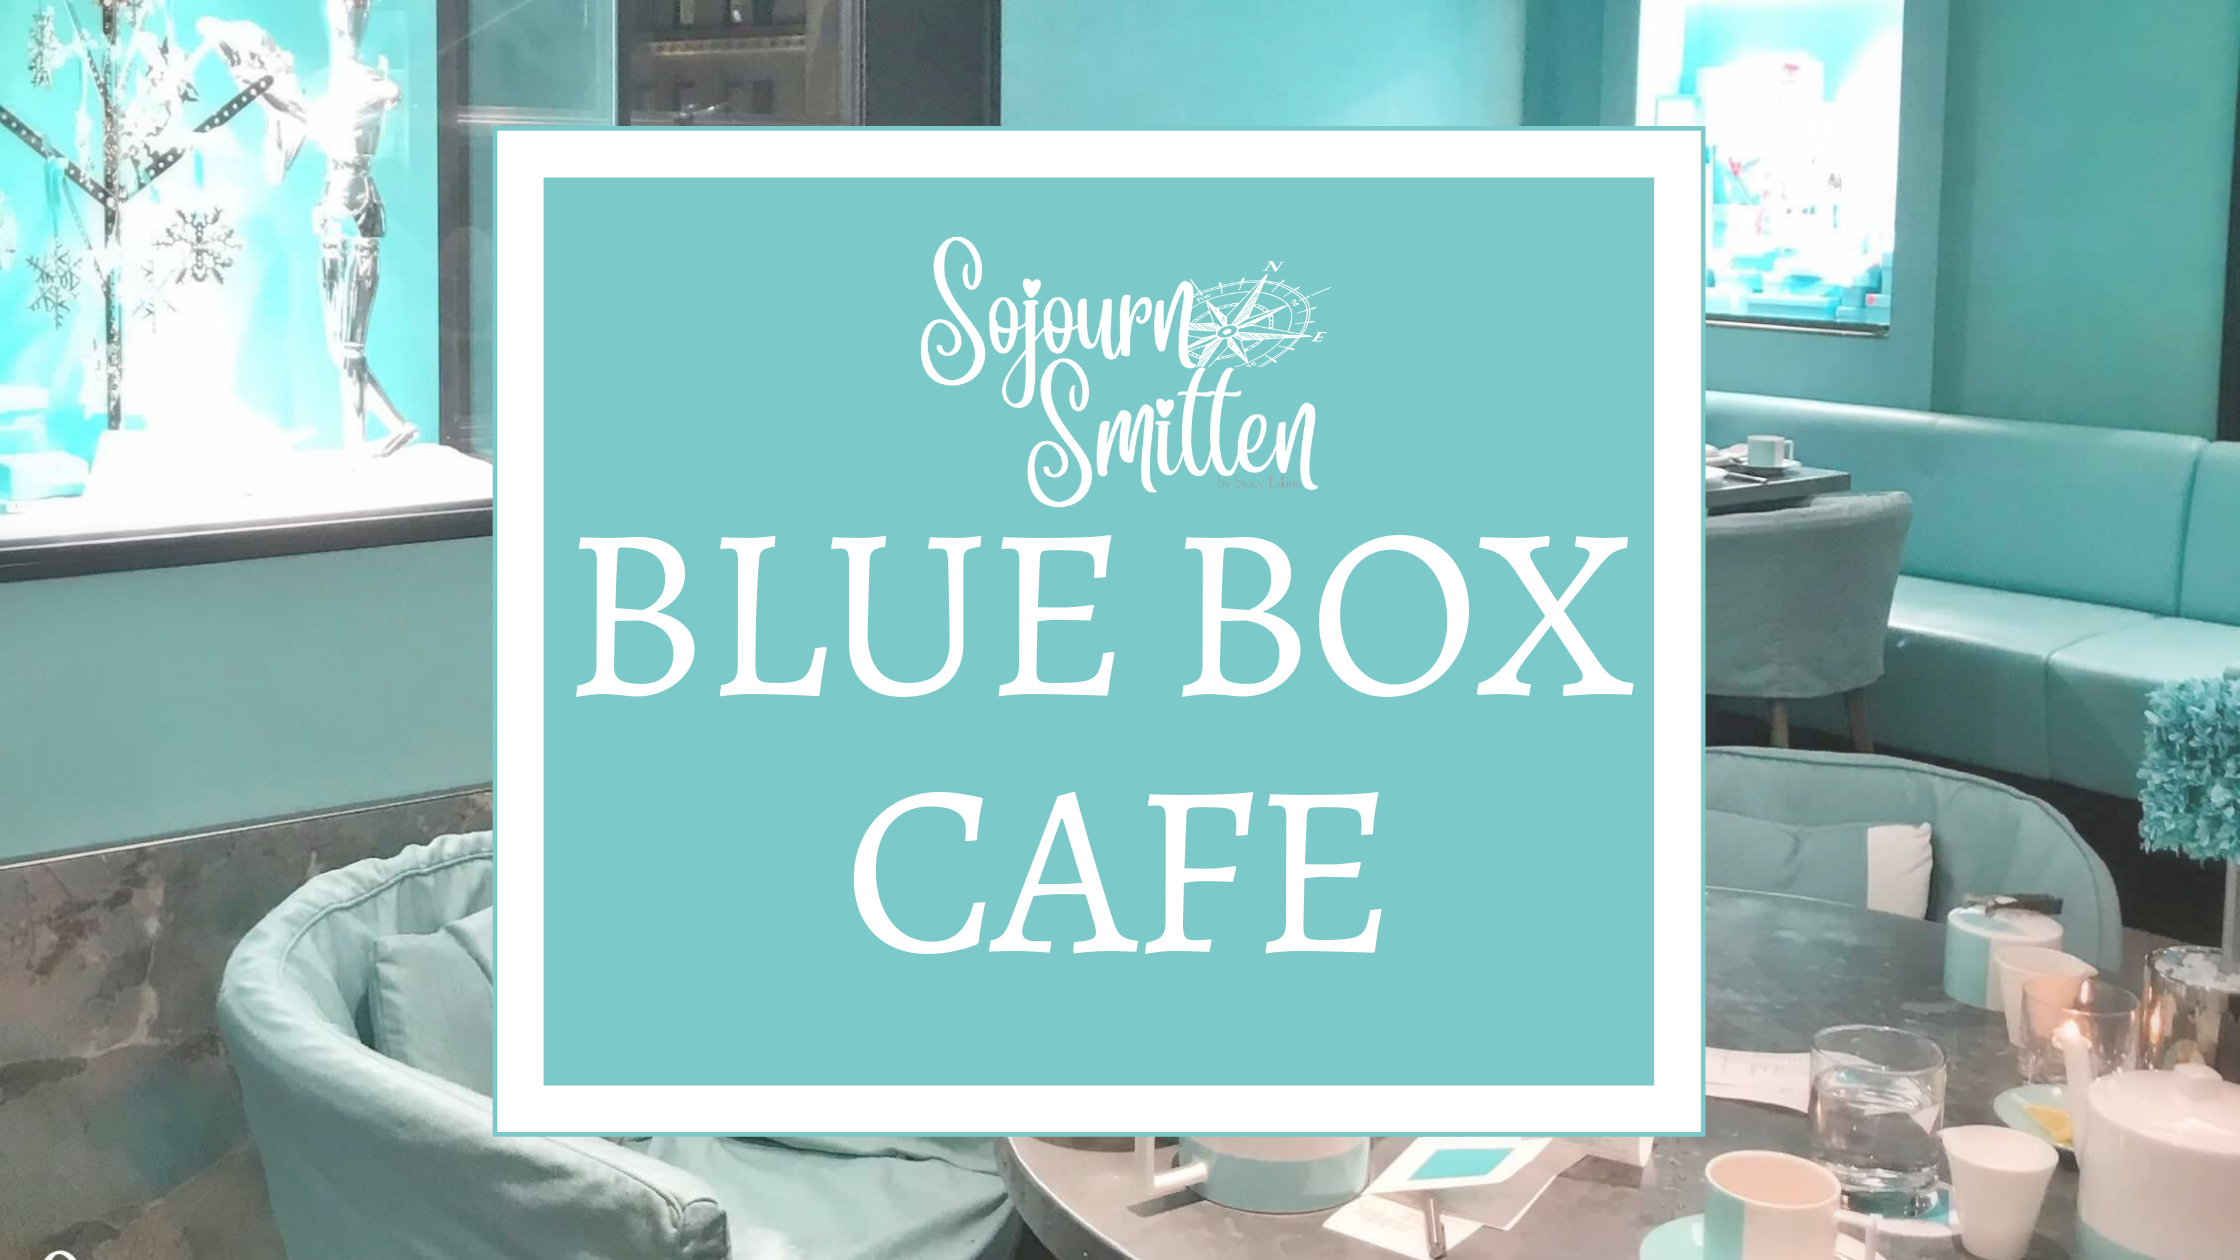 The Blue Box Cafe